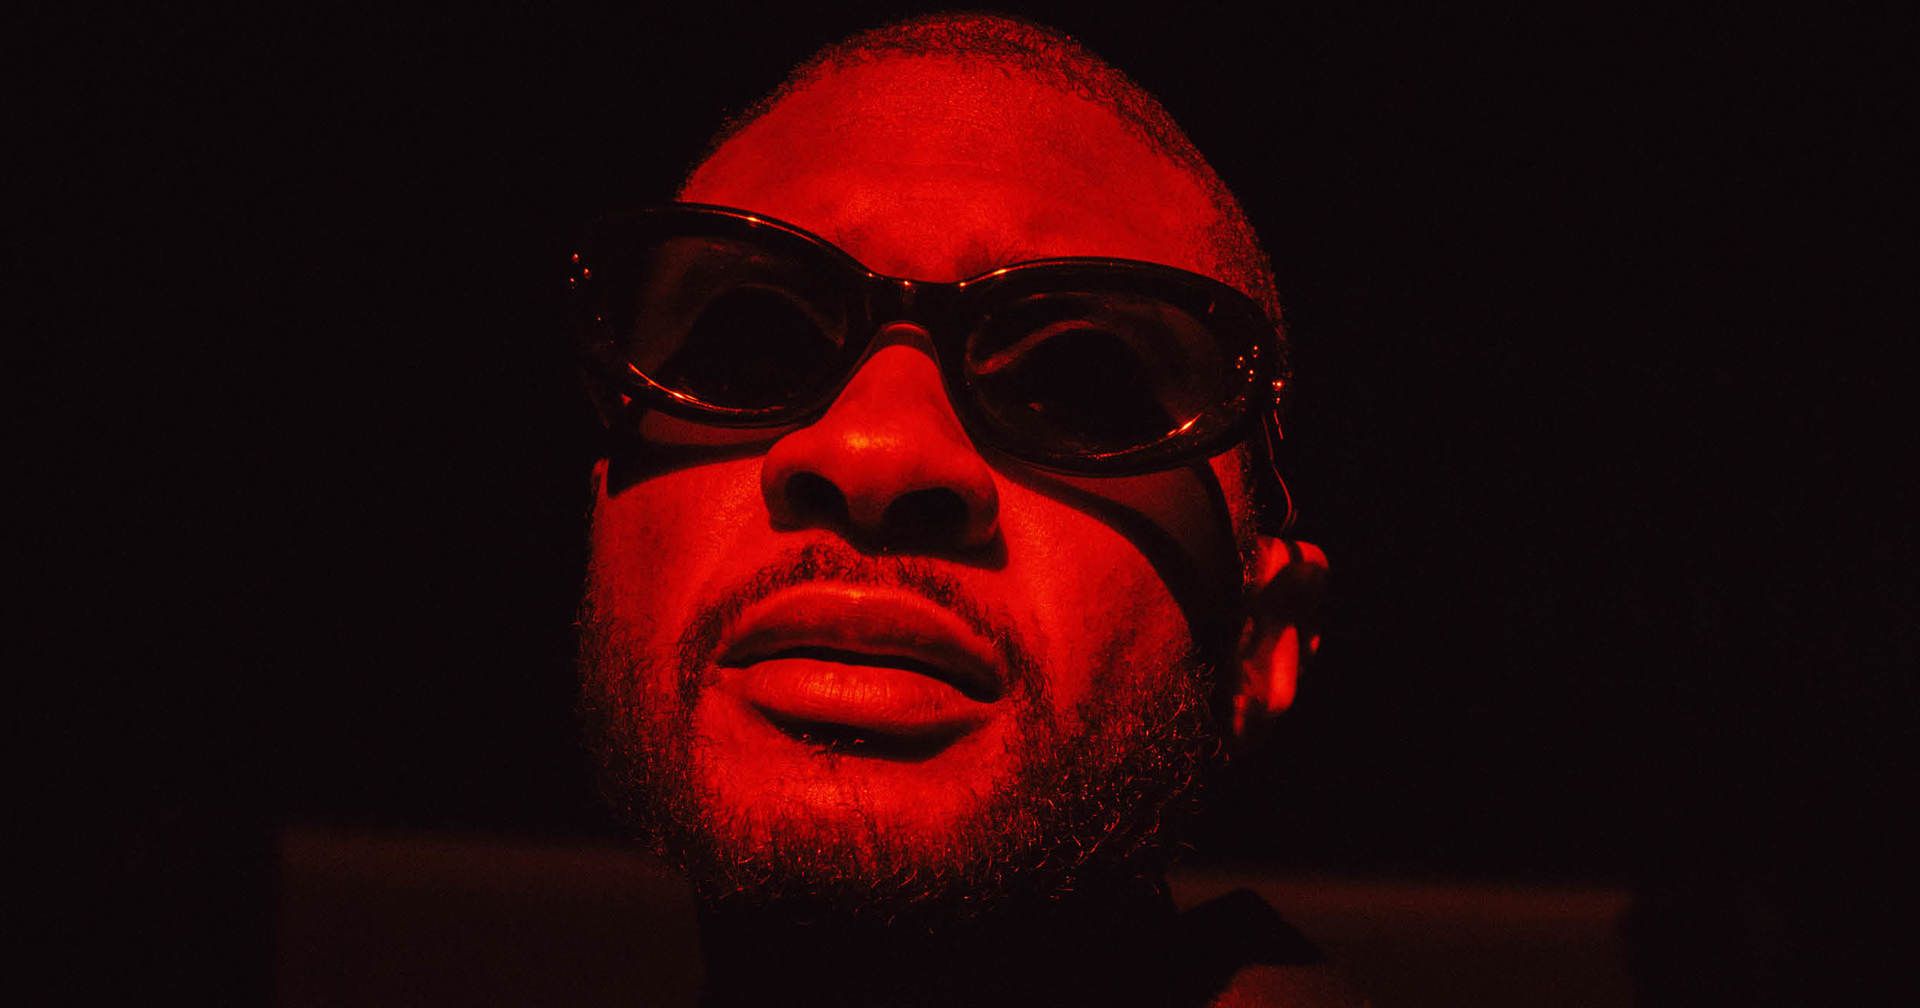 A man wearing sunglasses with a red light shining on him - Usher